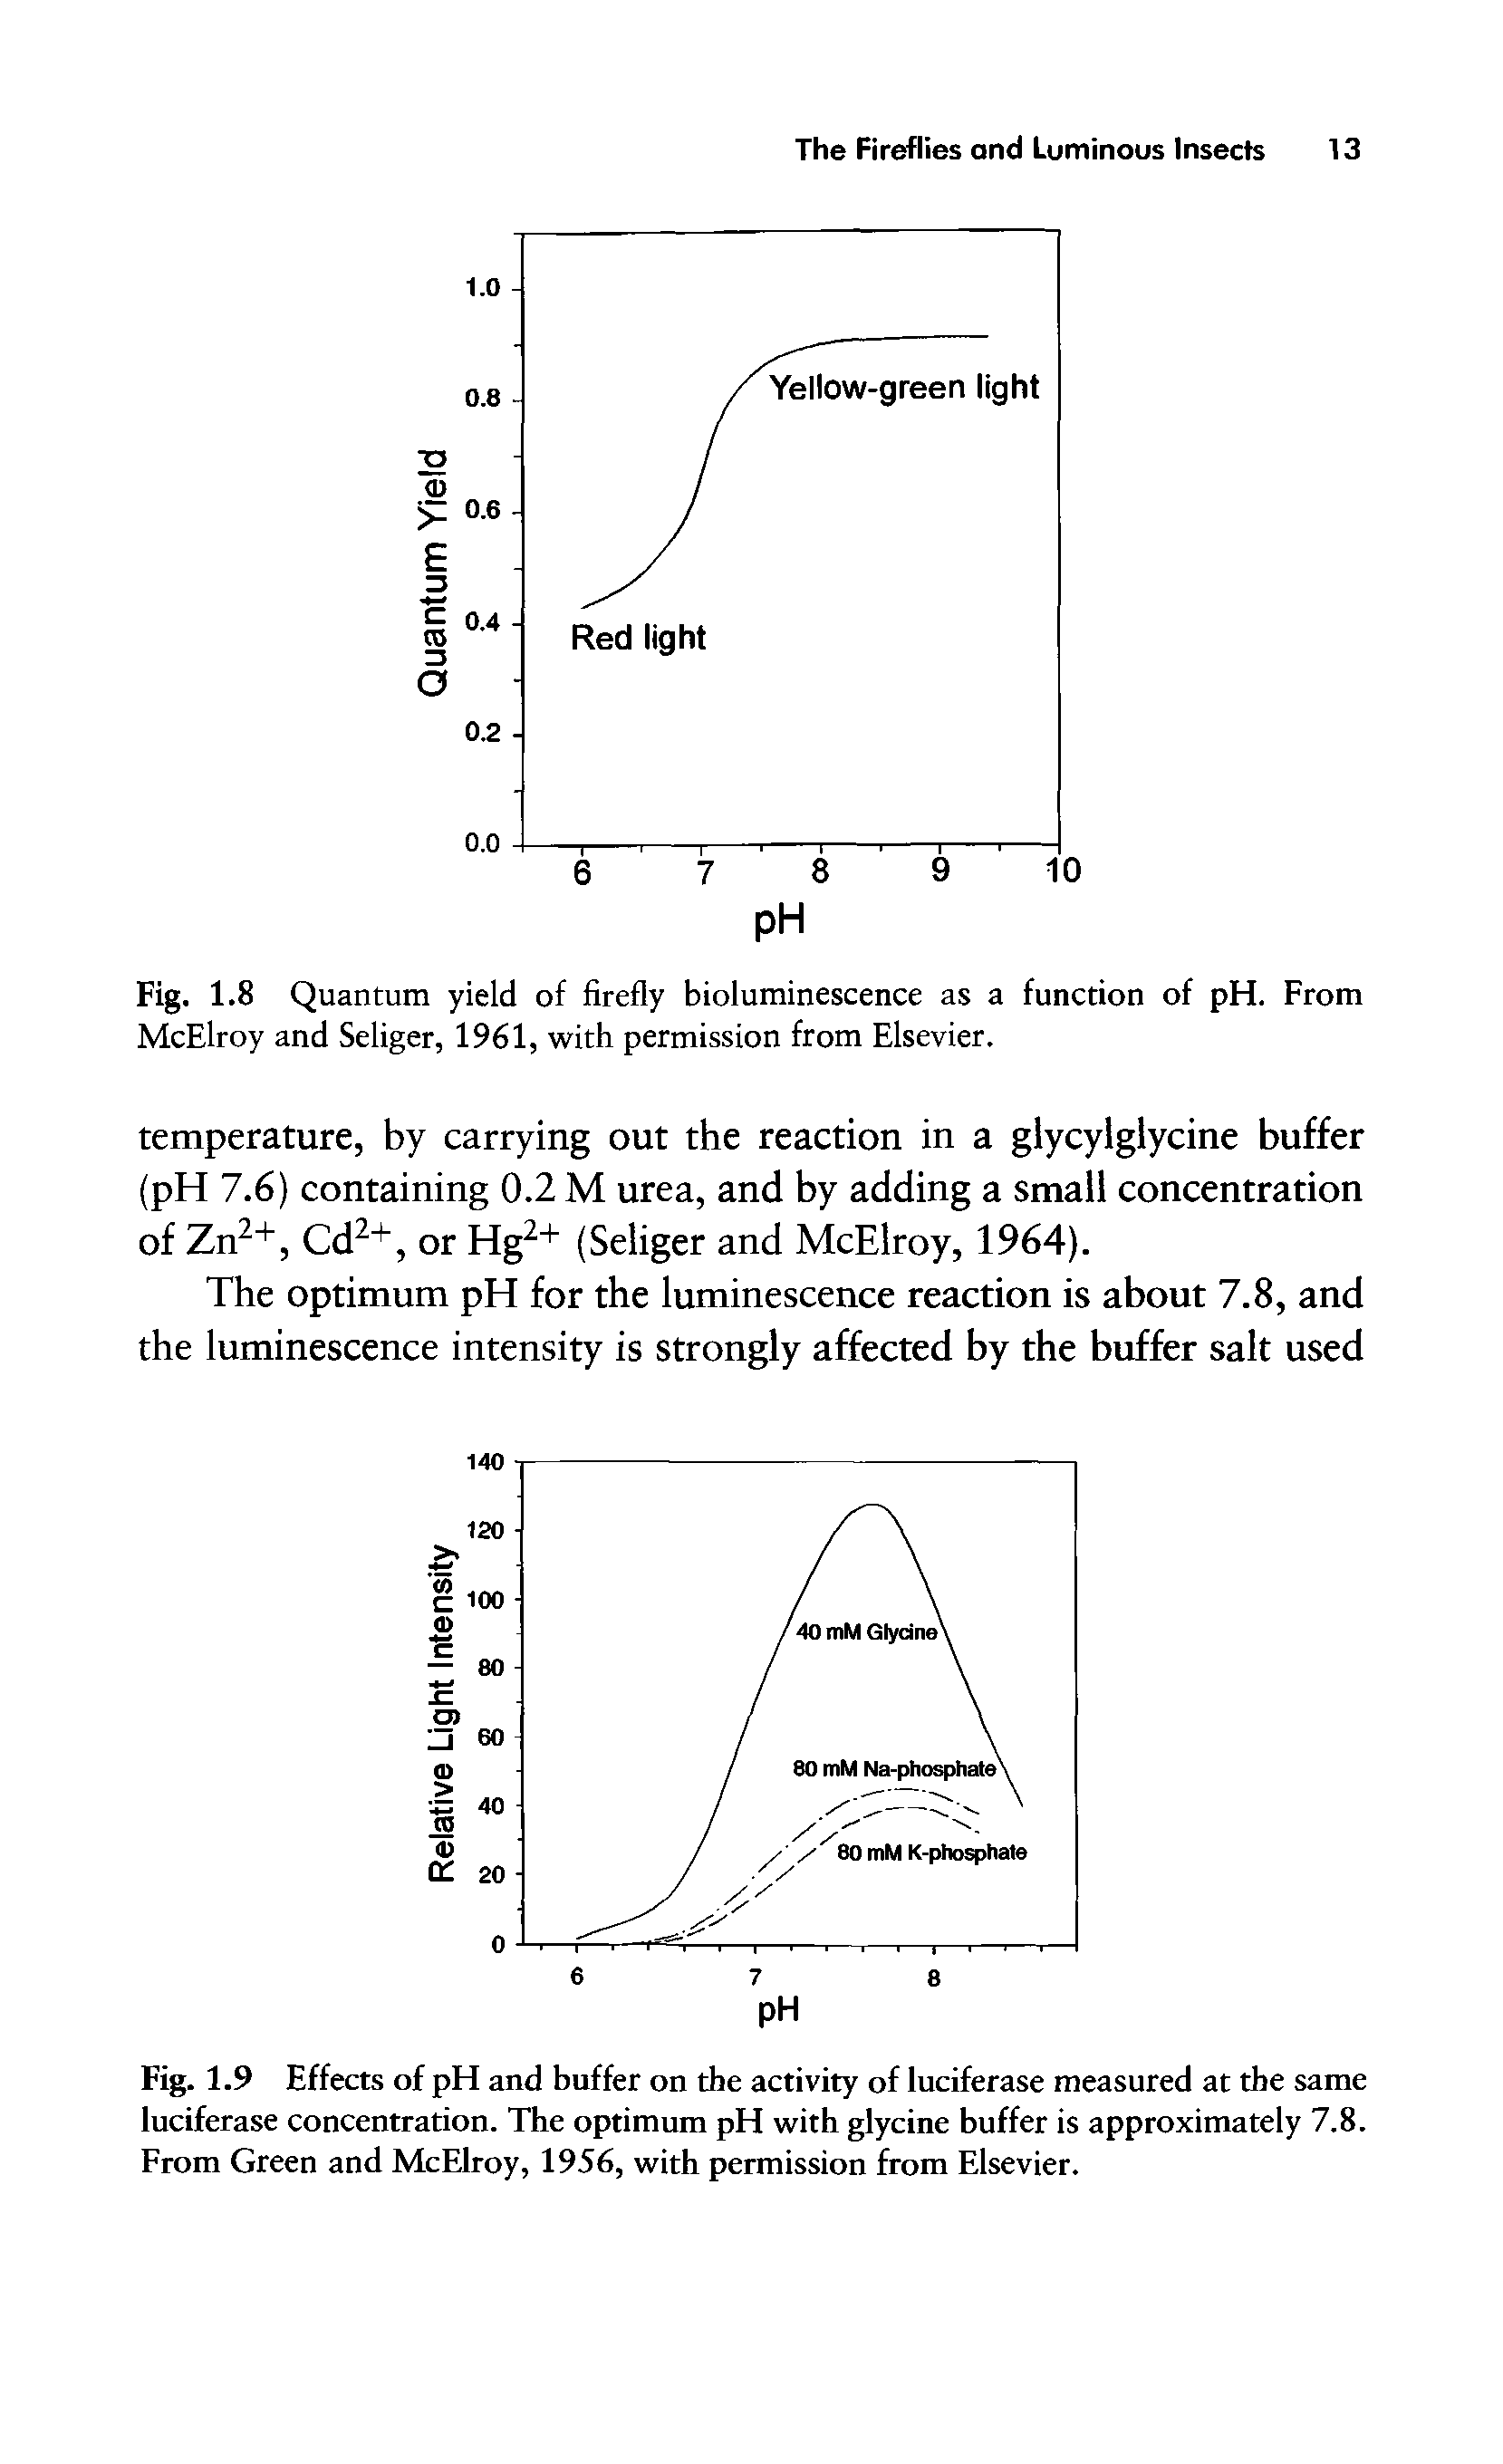 Fig. 1.8 Quantum yield of firefly bioluminescence as a function of pH. From McElroy and Seliger, 1961, with permission from Elsevier.